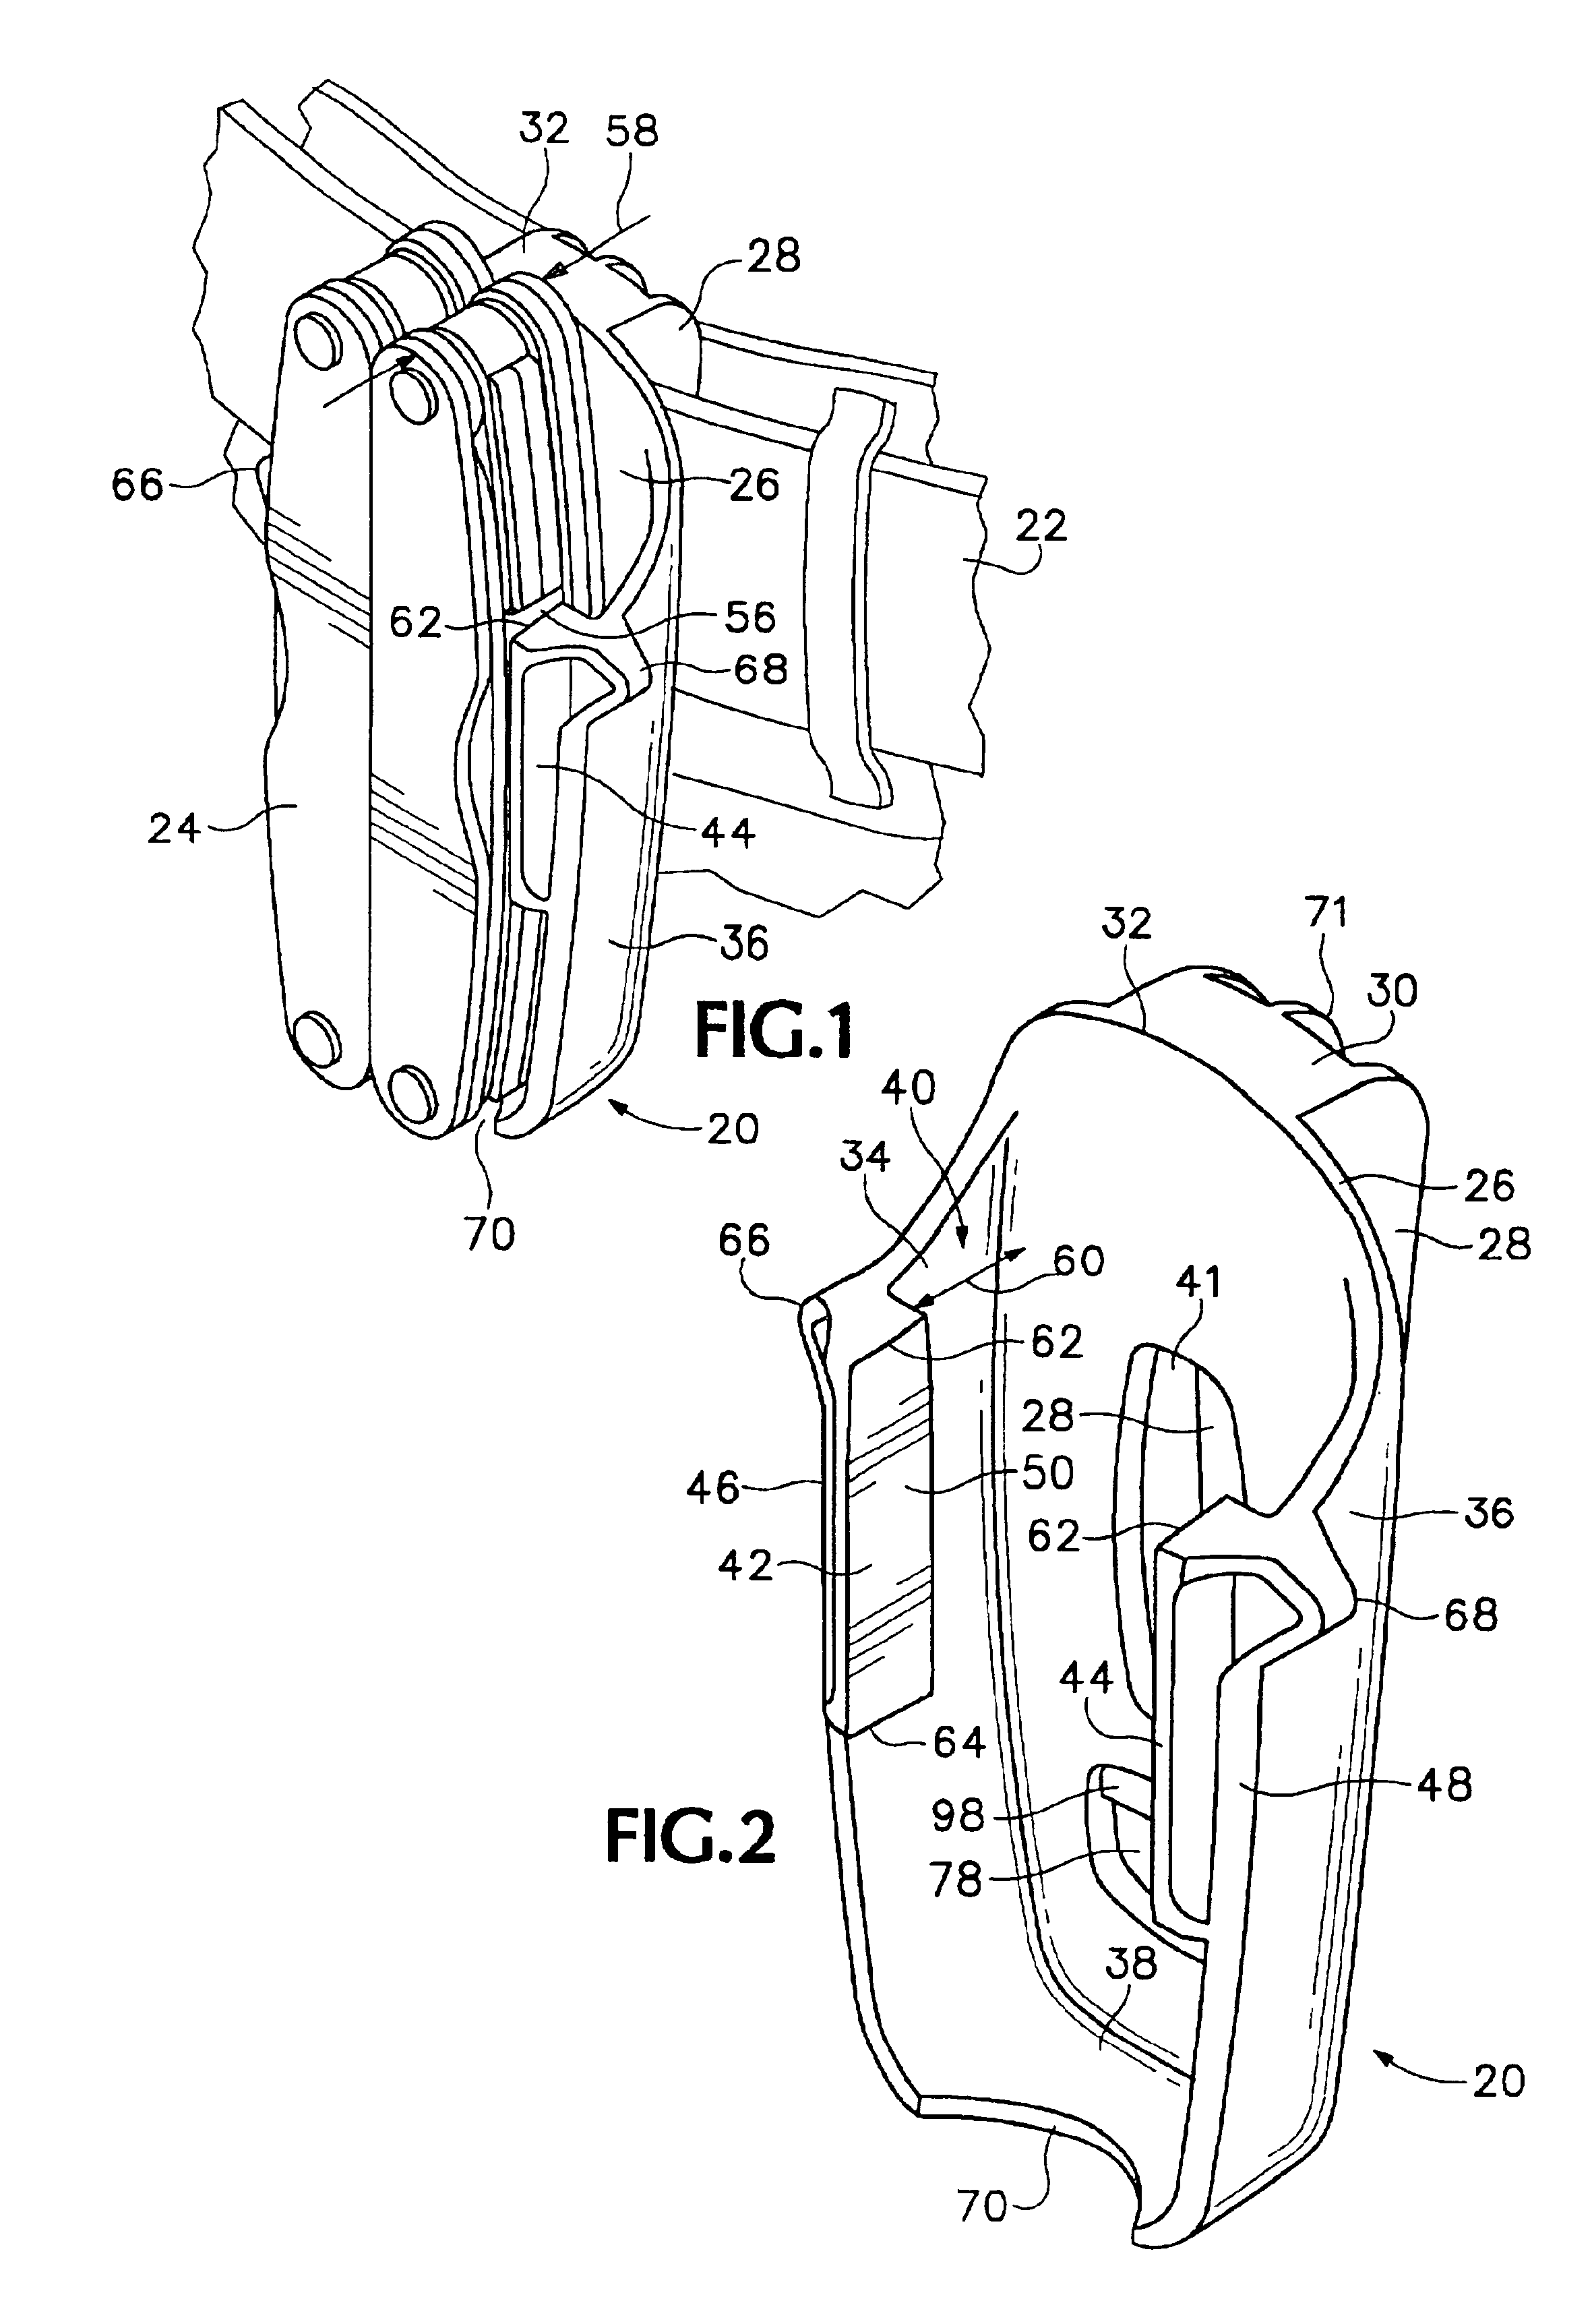 Carrier for attaching a multipurpose tool to a belt